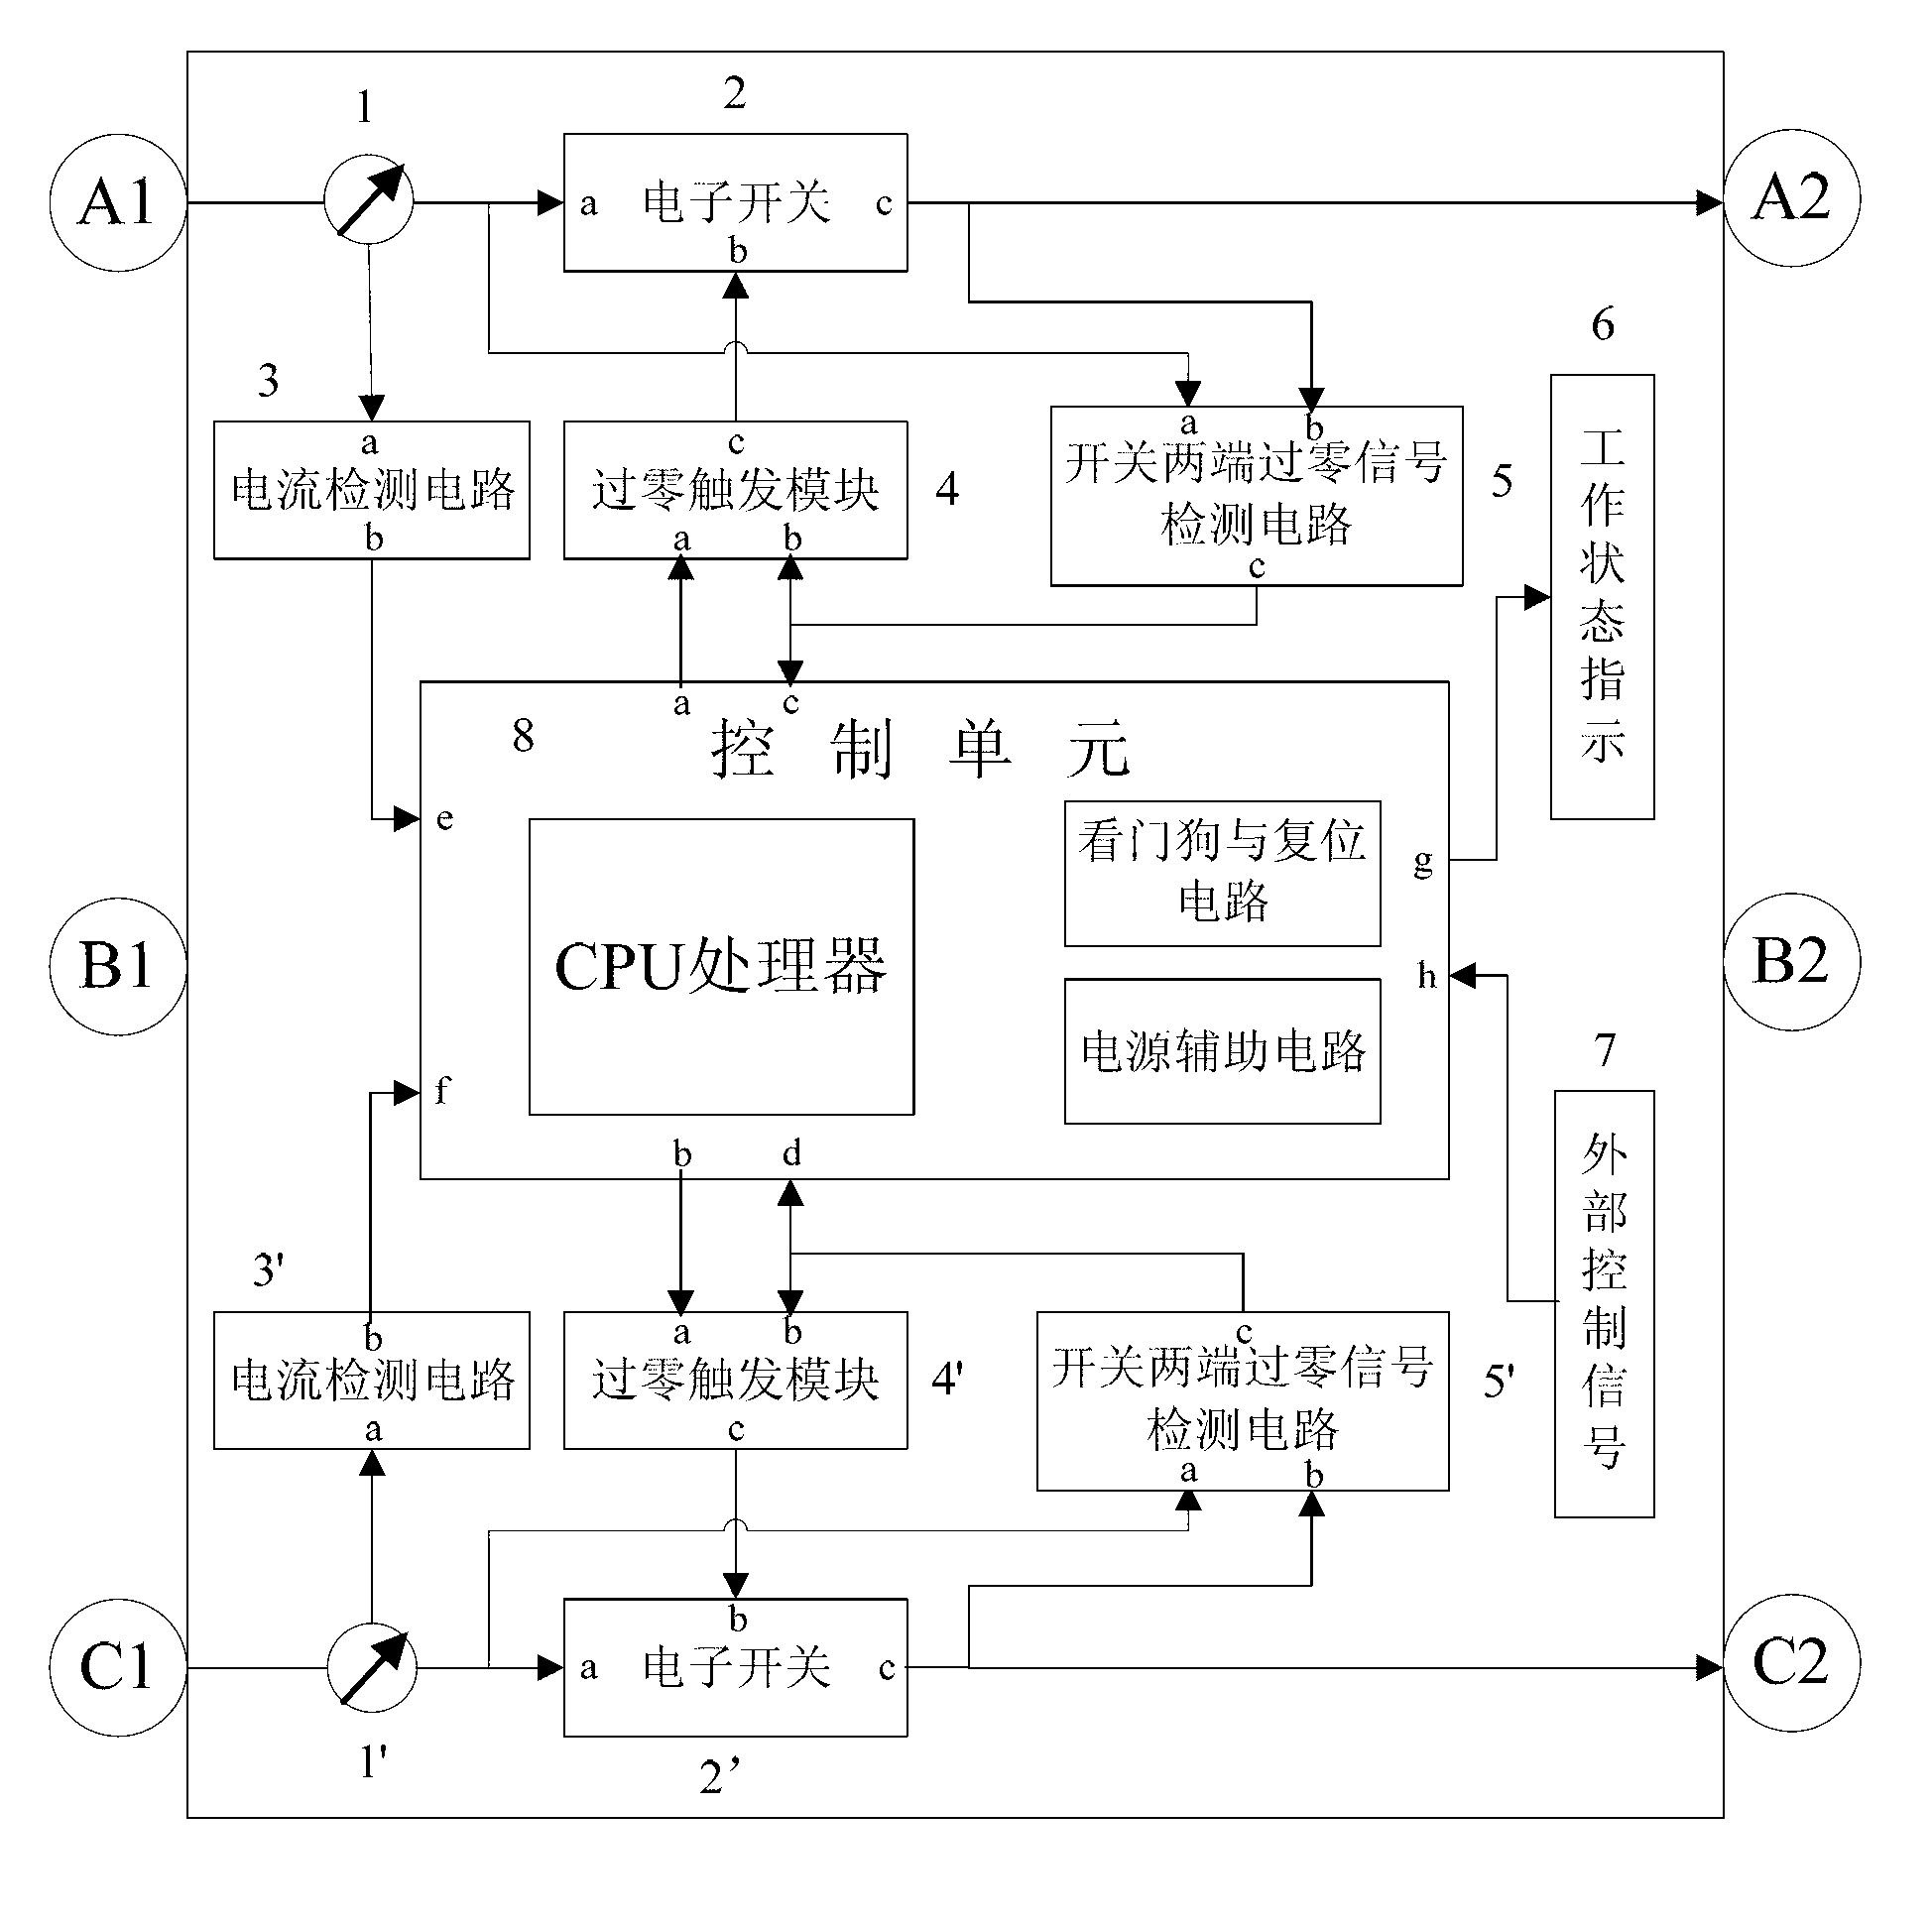 Low-power-consumption rapid capacitor switching switch with intelligent control